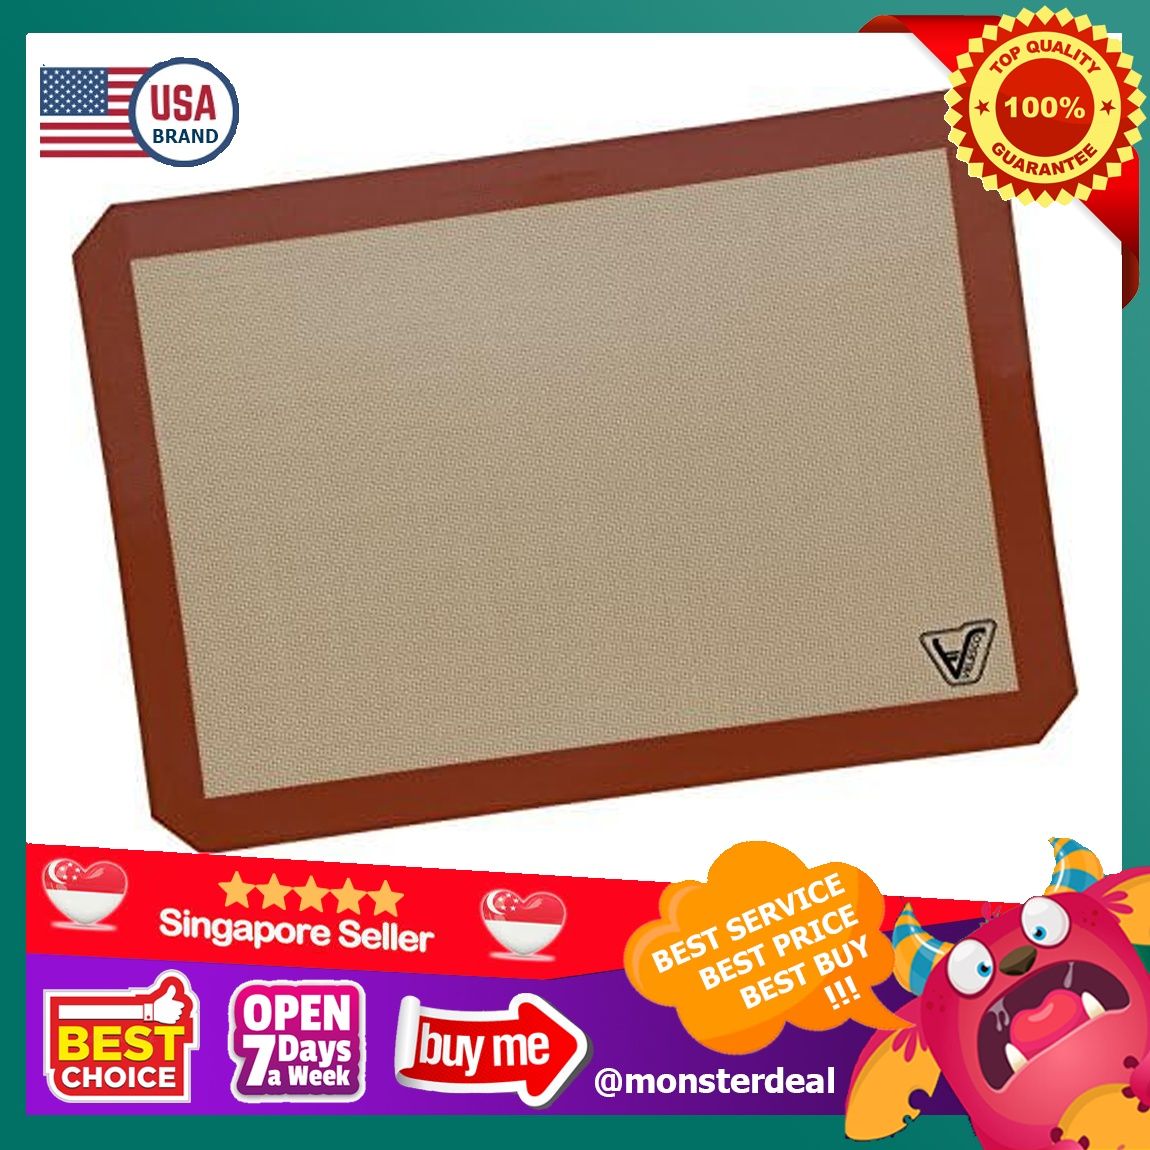  Silicone Macaron Baking Mat - Set of 2 Half Sheet (Thick &  Large 11 5/8 x 16 1/2) - Non Stick Silicon Liner for Bake Pans & Rolling  - Macaroon/Pastry/Cookie Making 